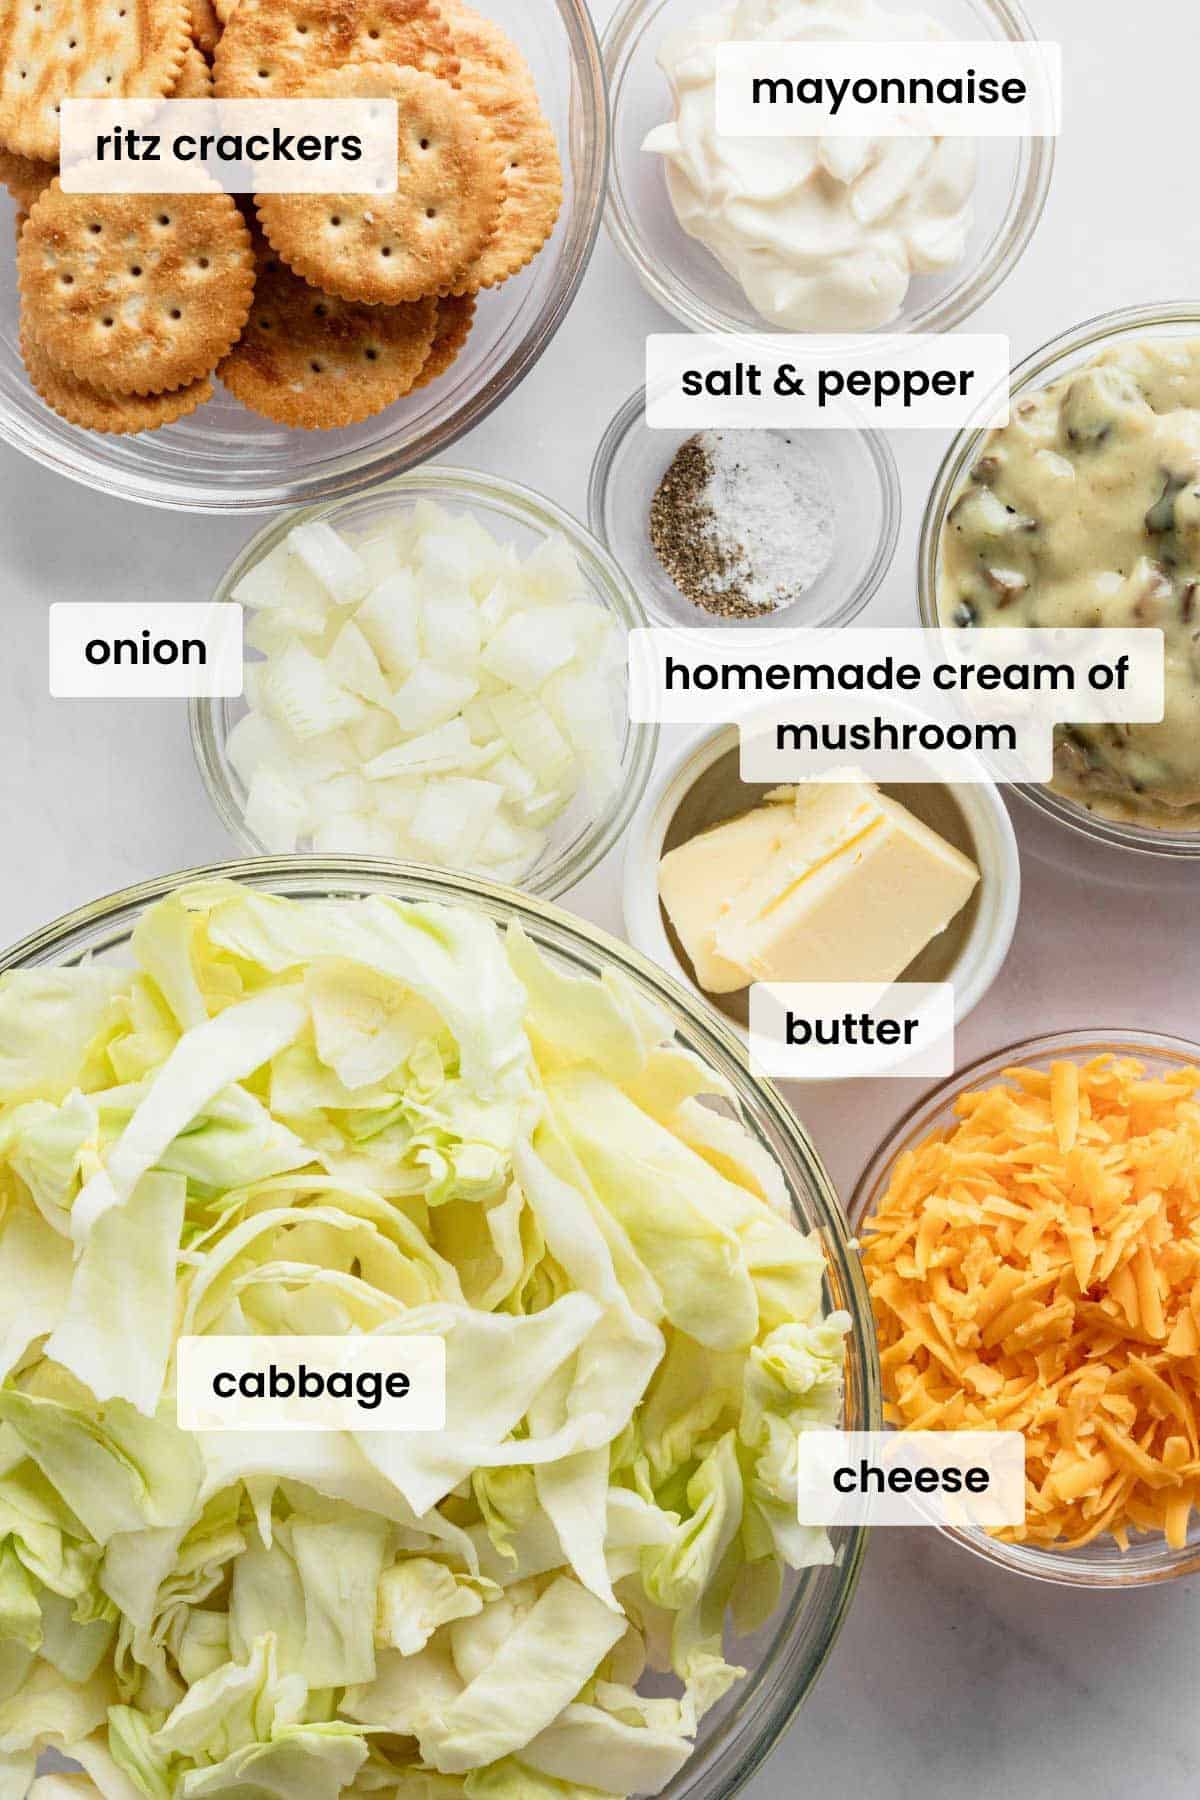 ingredients for green cabbage casserole.